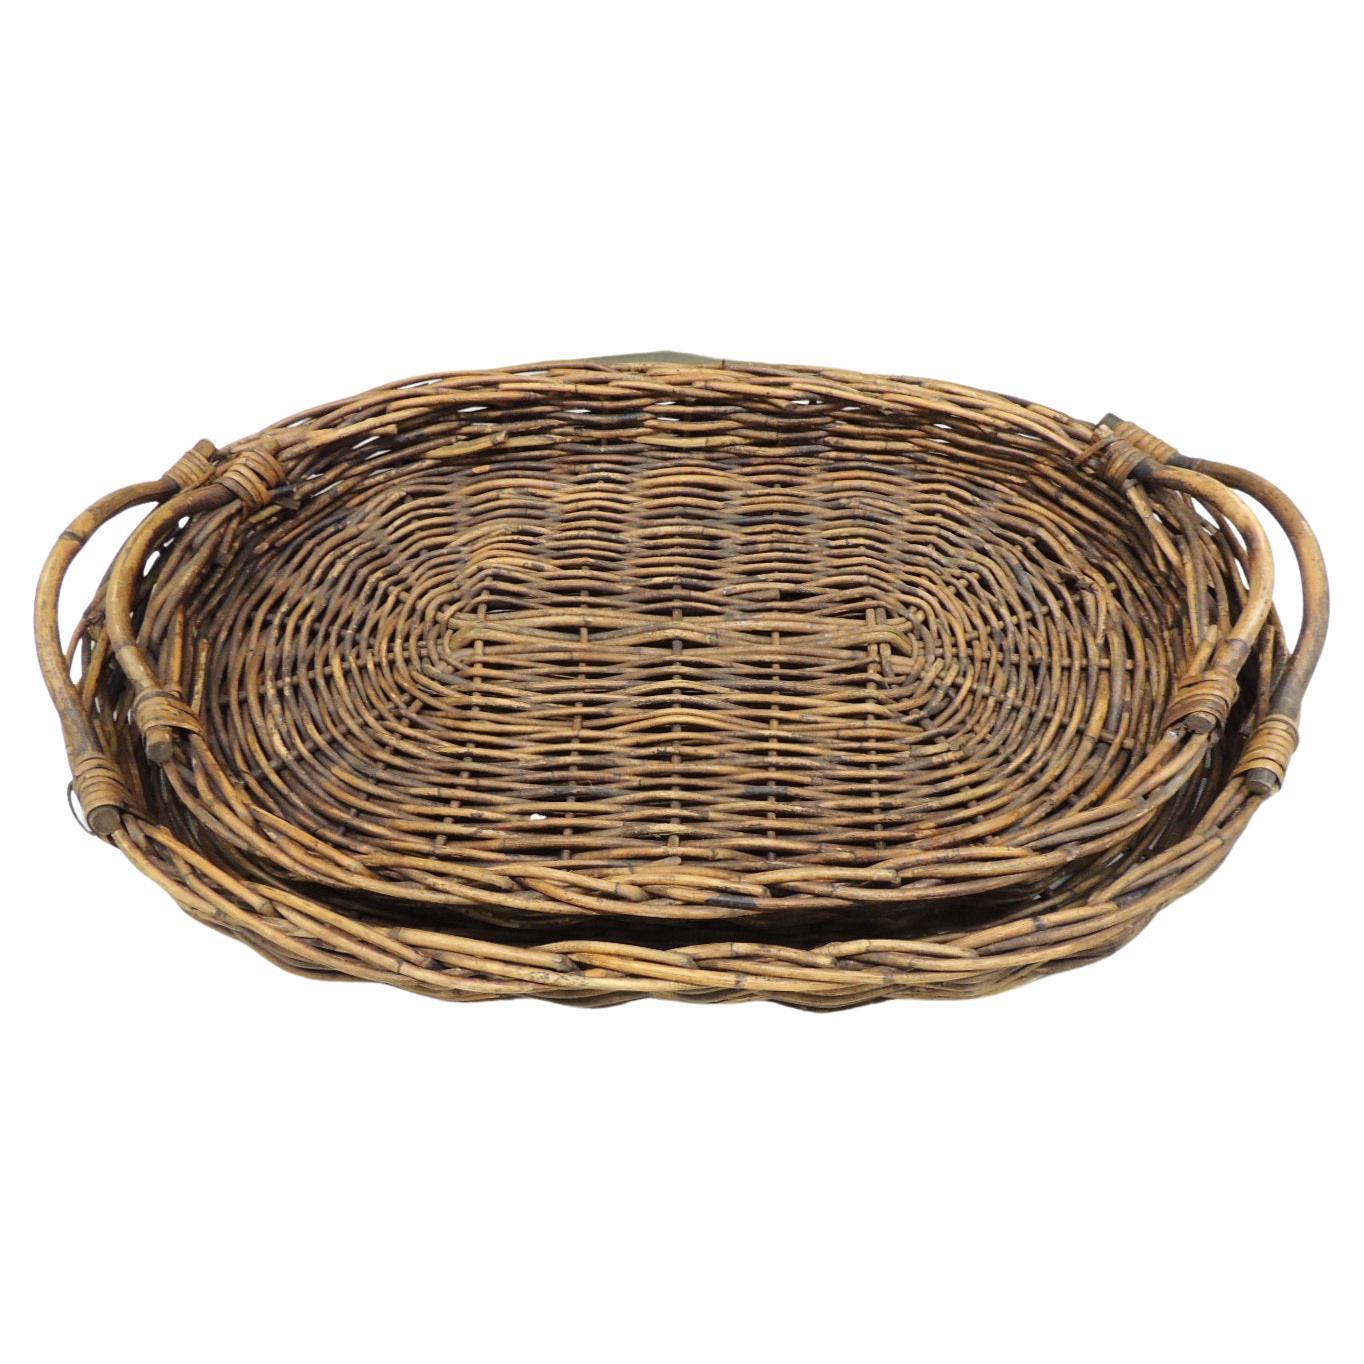 Set of '2' Rattan Oval Large Woven Nesting Serving Trays with Handles